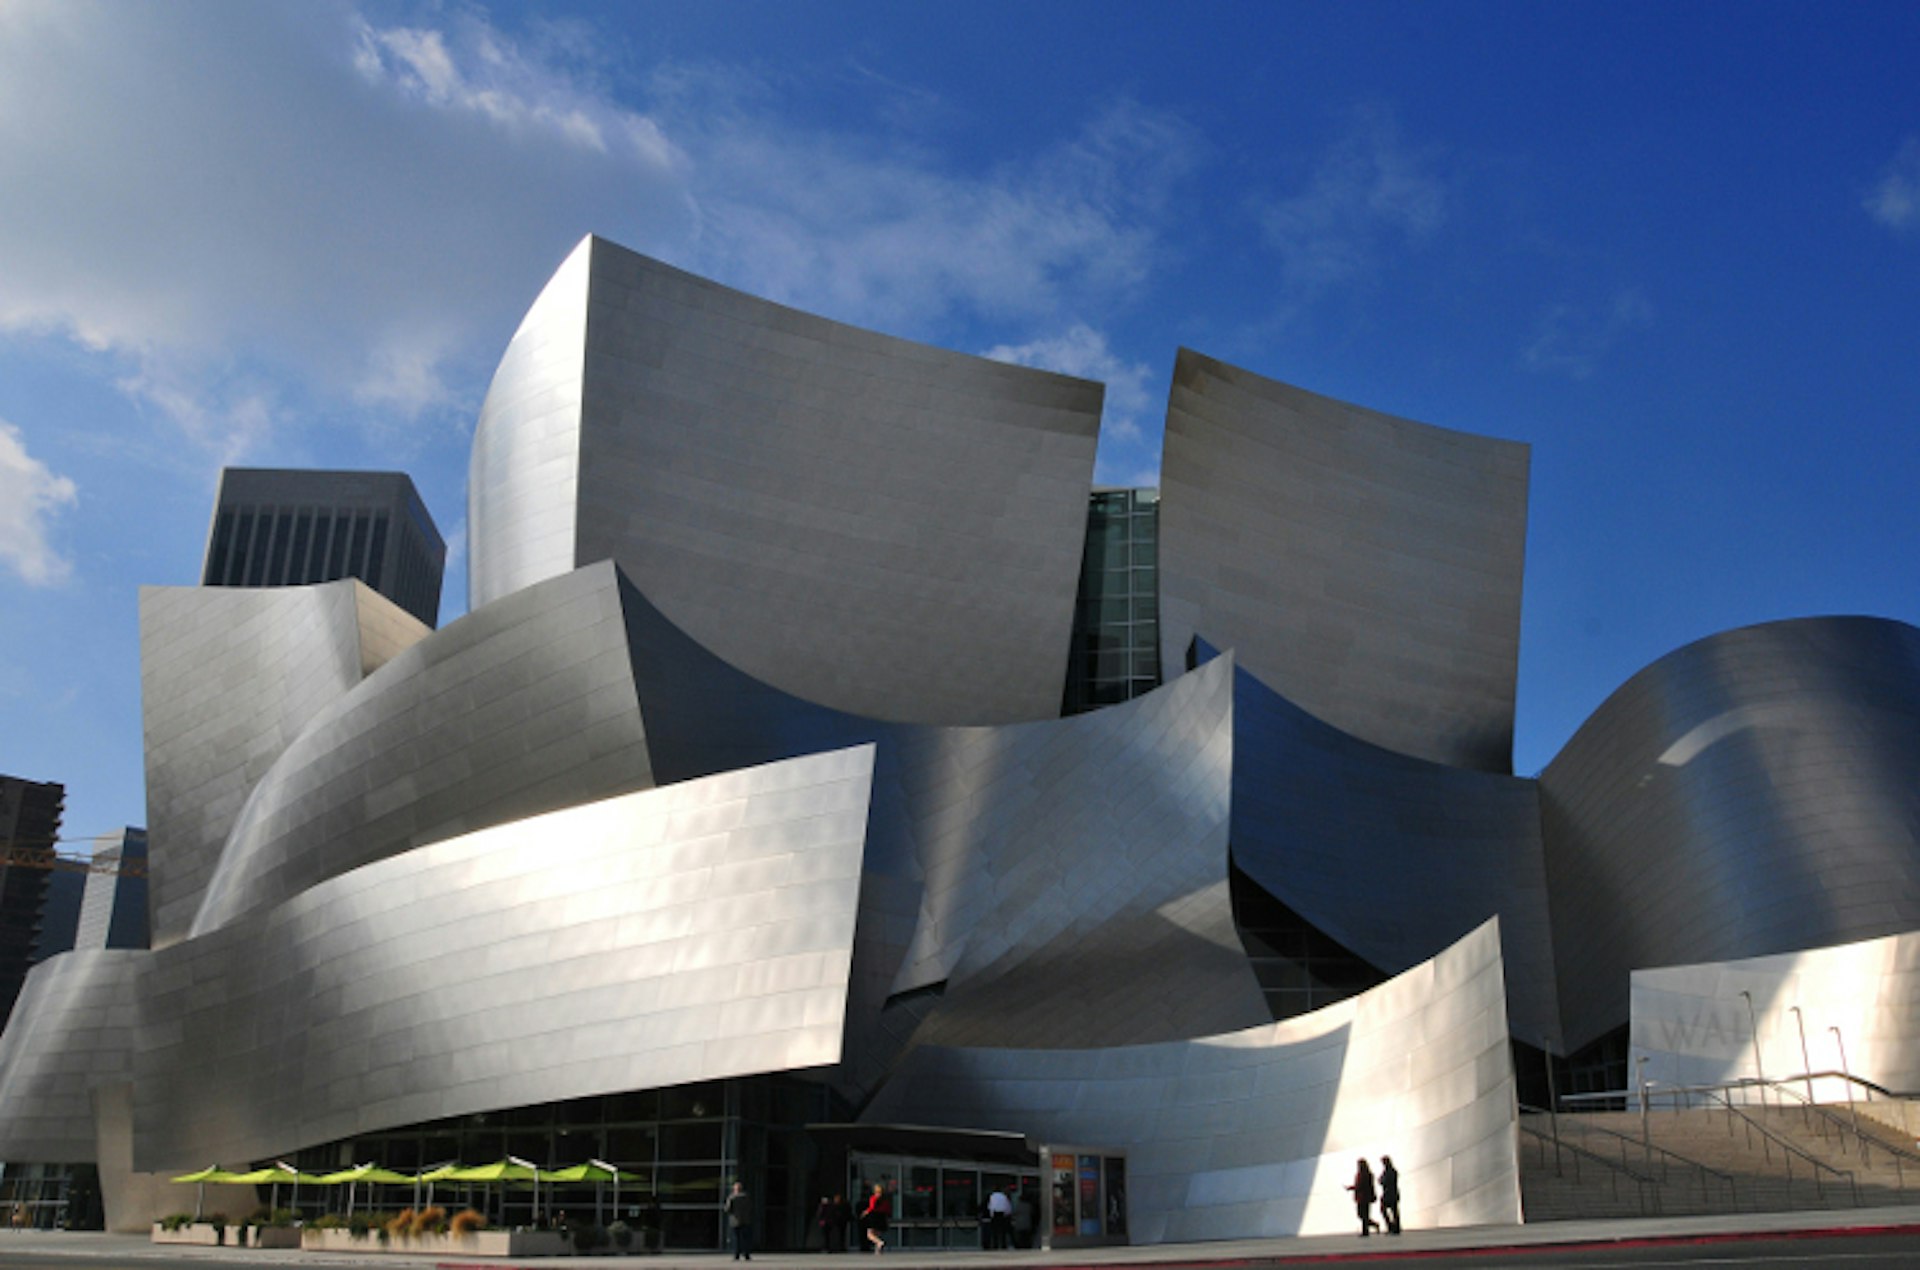 An instant classic, Frank Gehry's typically idiosyncratic Walt Disney Concert Hall. Image by Mitch Diamond / Photolibrary / Getty Images